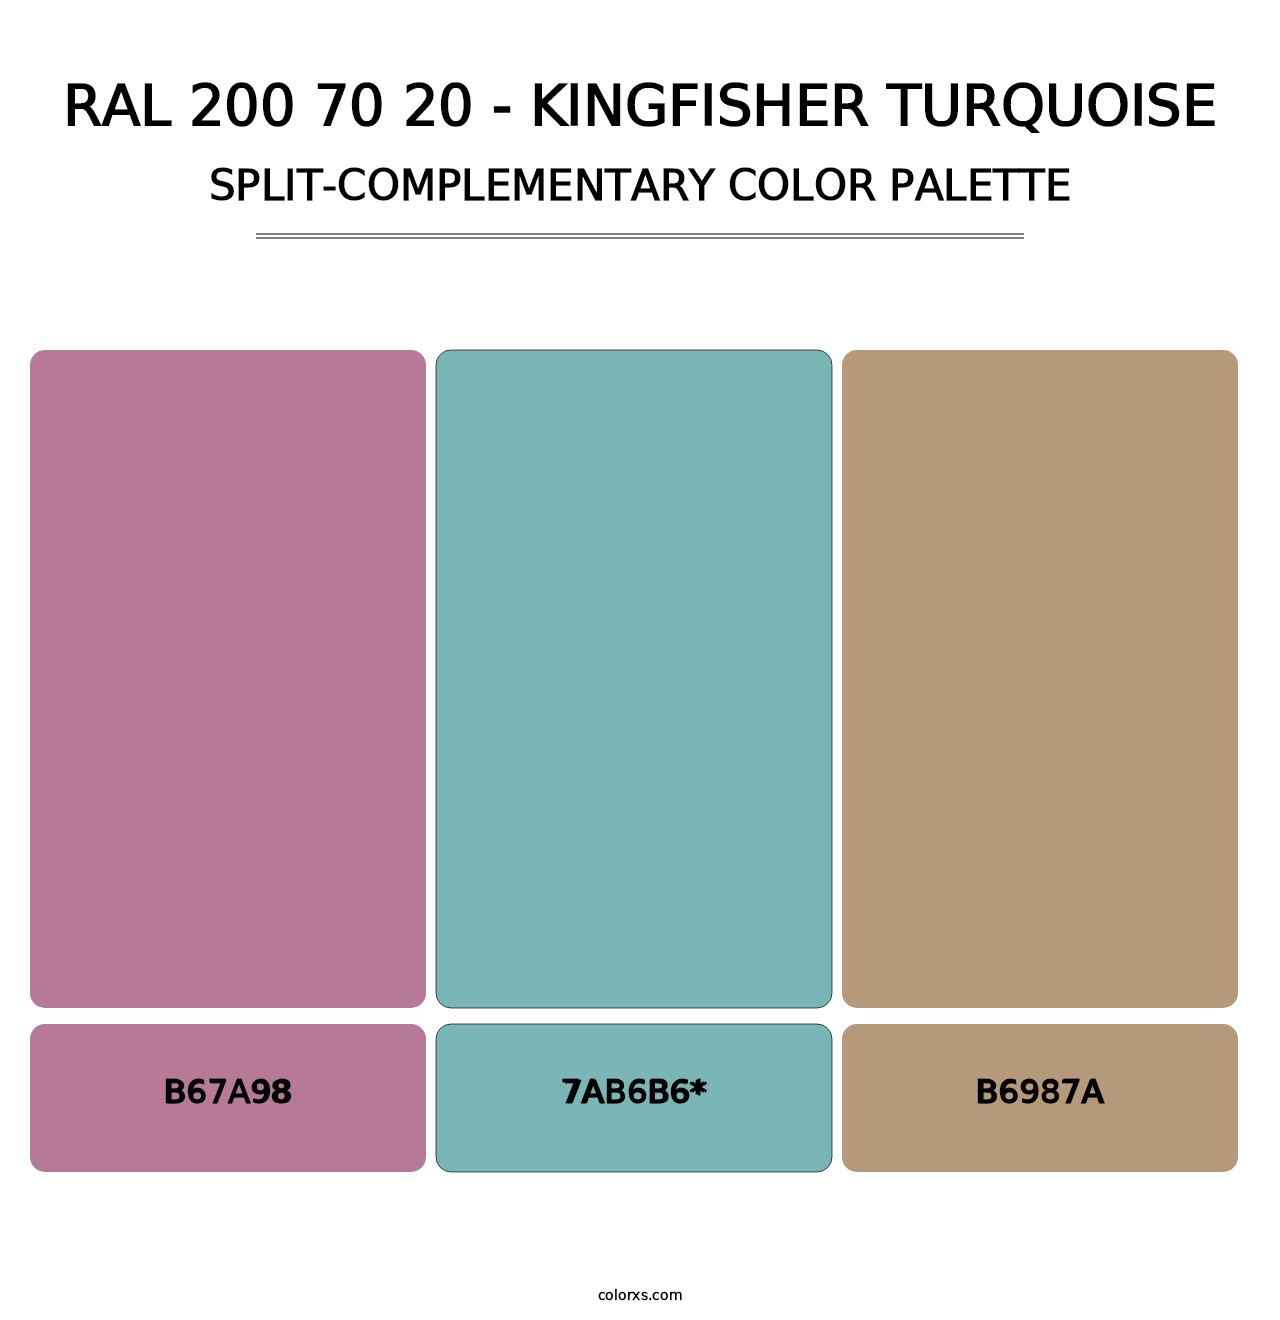 RAL 200 70 20 - Kingfisher Turquoise - Split-Complementary Color Palette